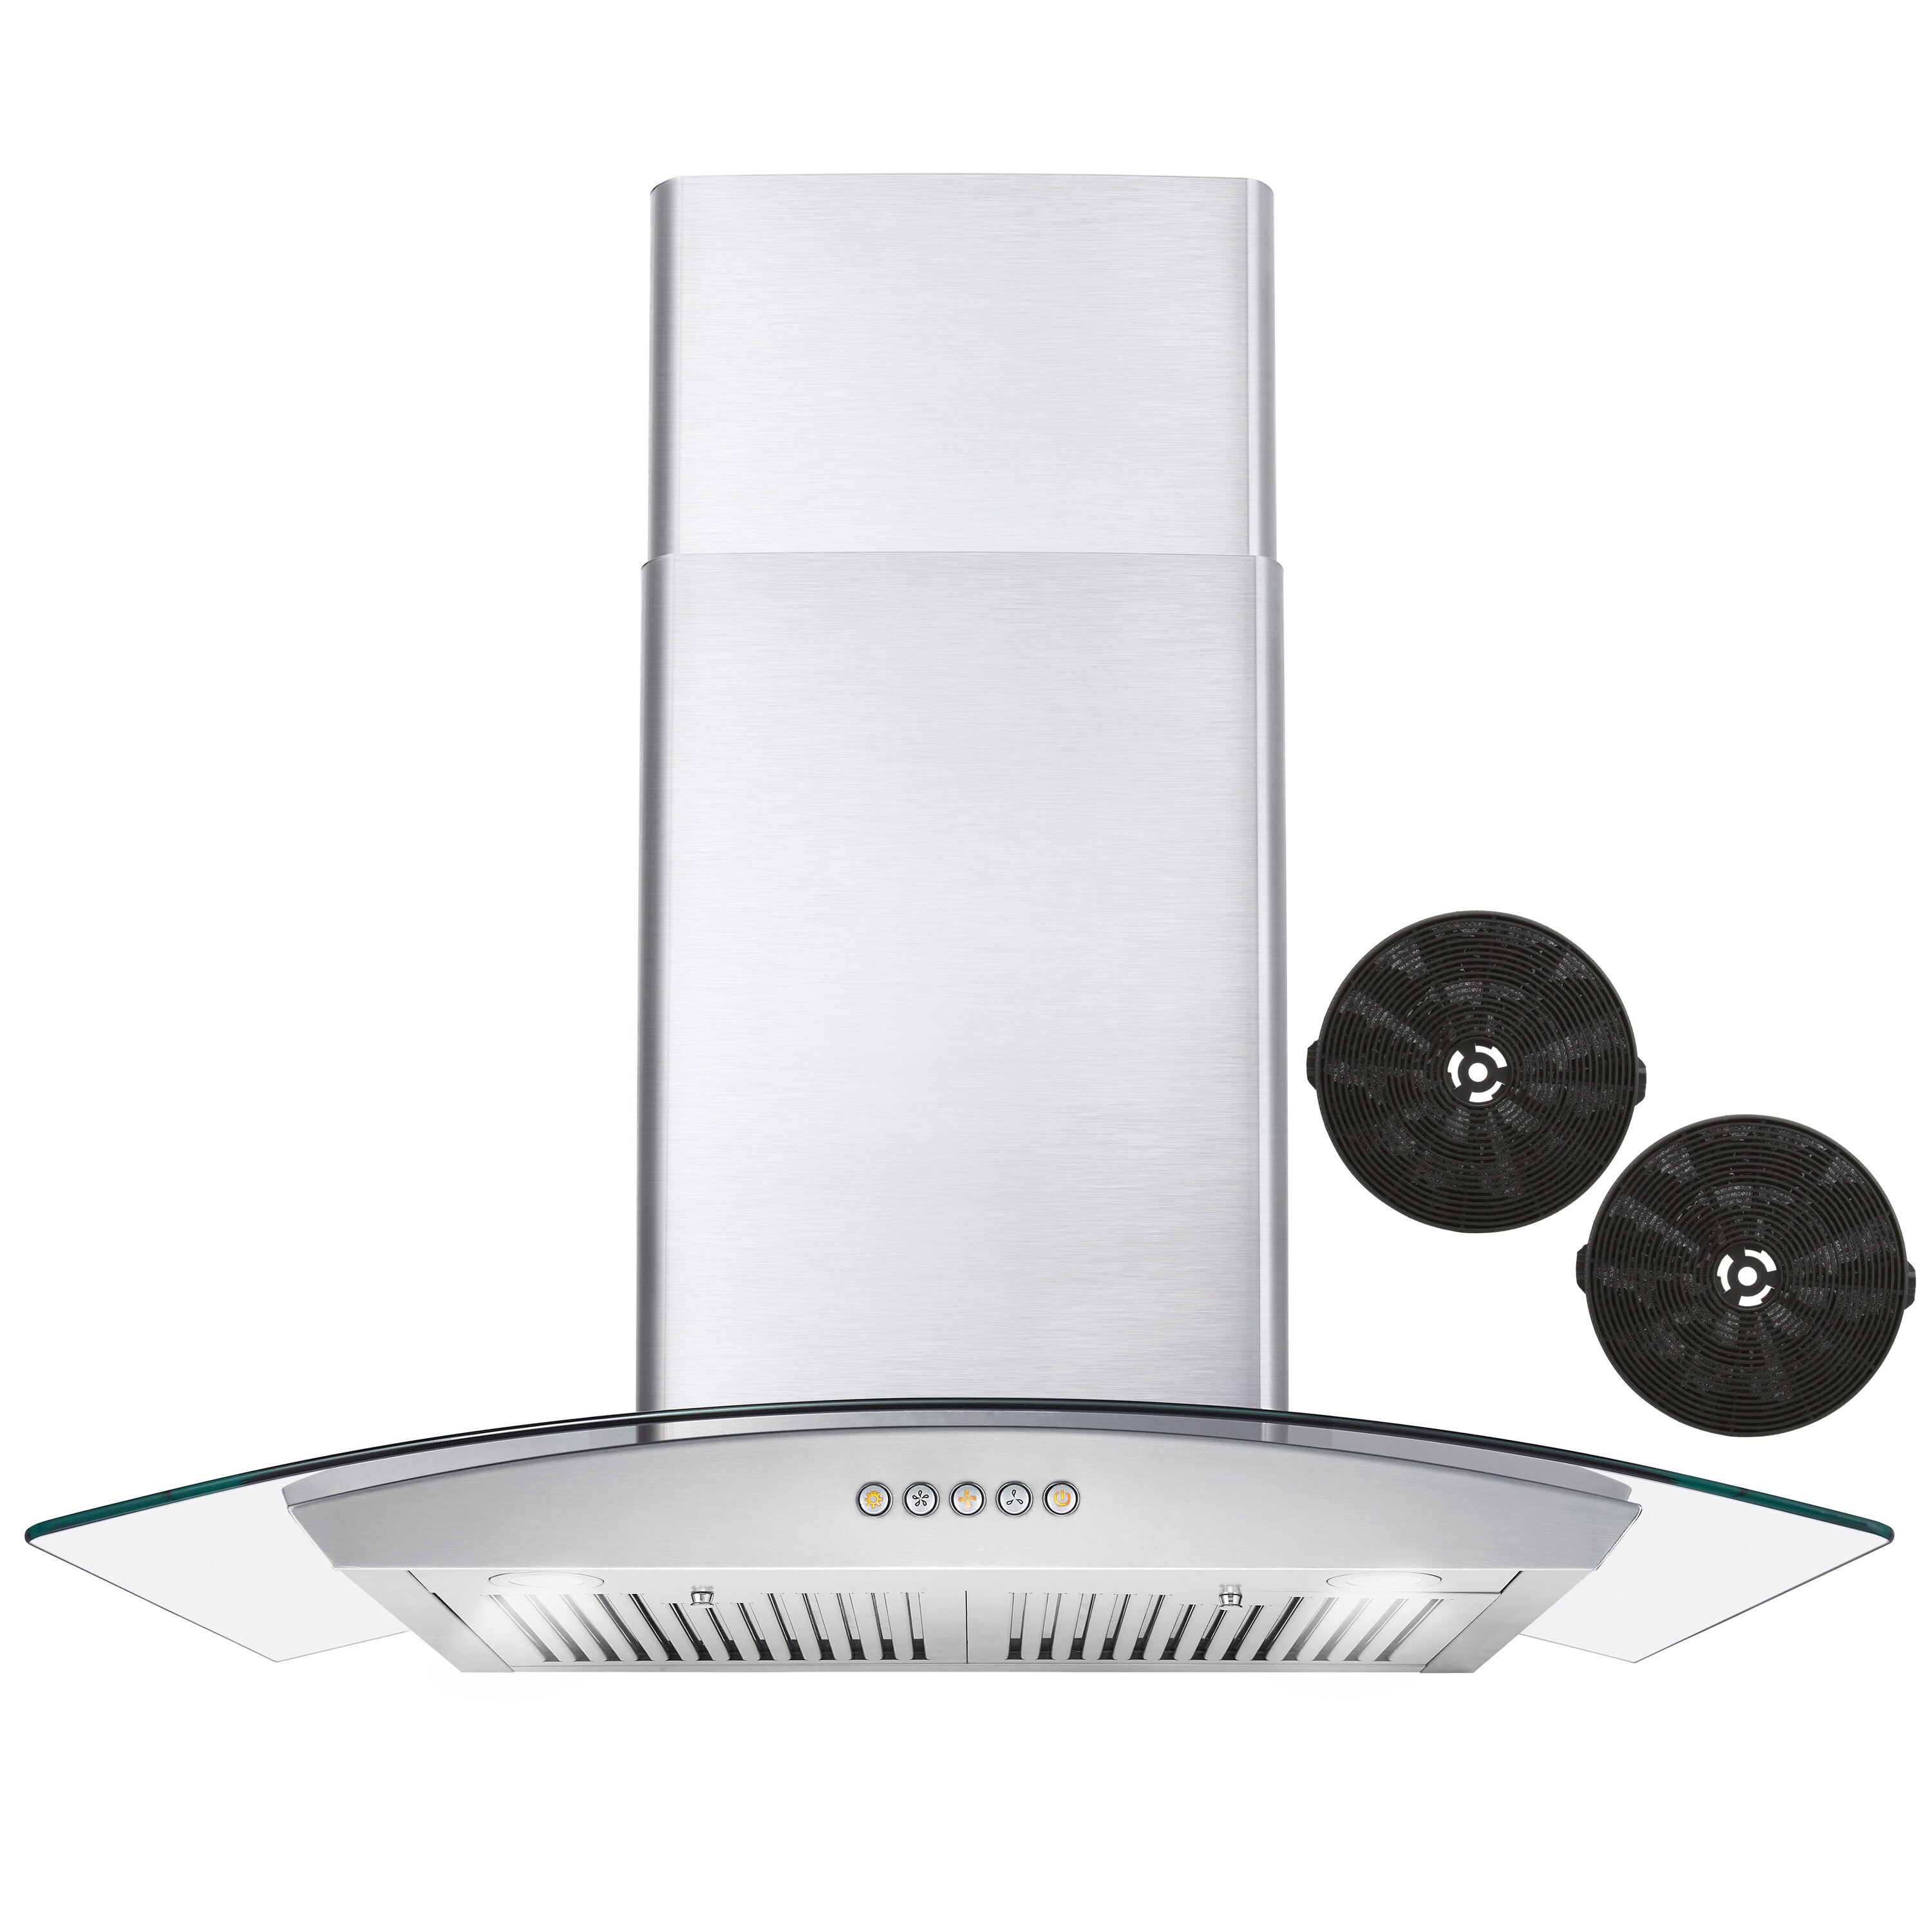 New 30" Wall Mount LED Display Touch Vent Ductless/Ducted Range Steel Hood 